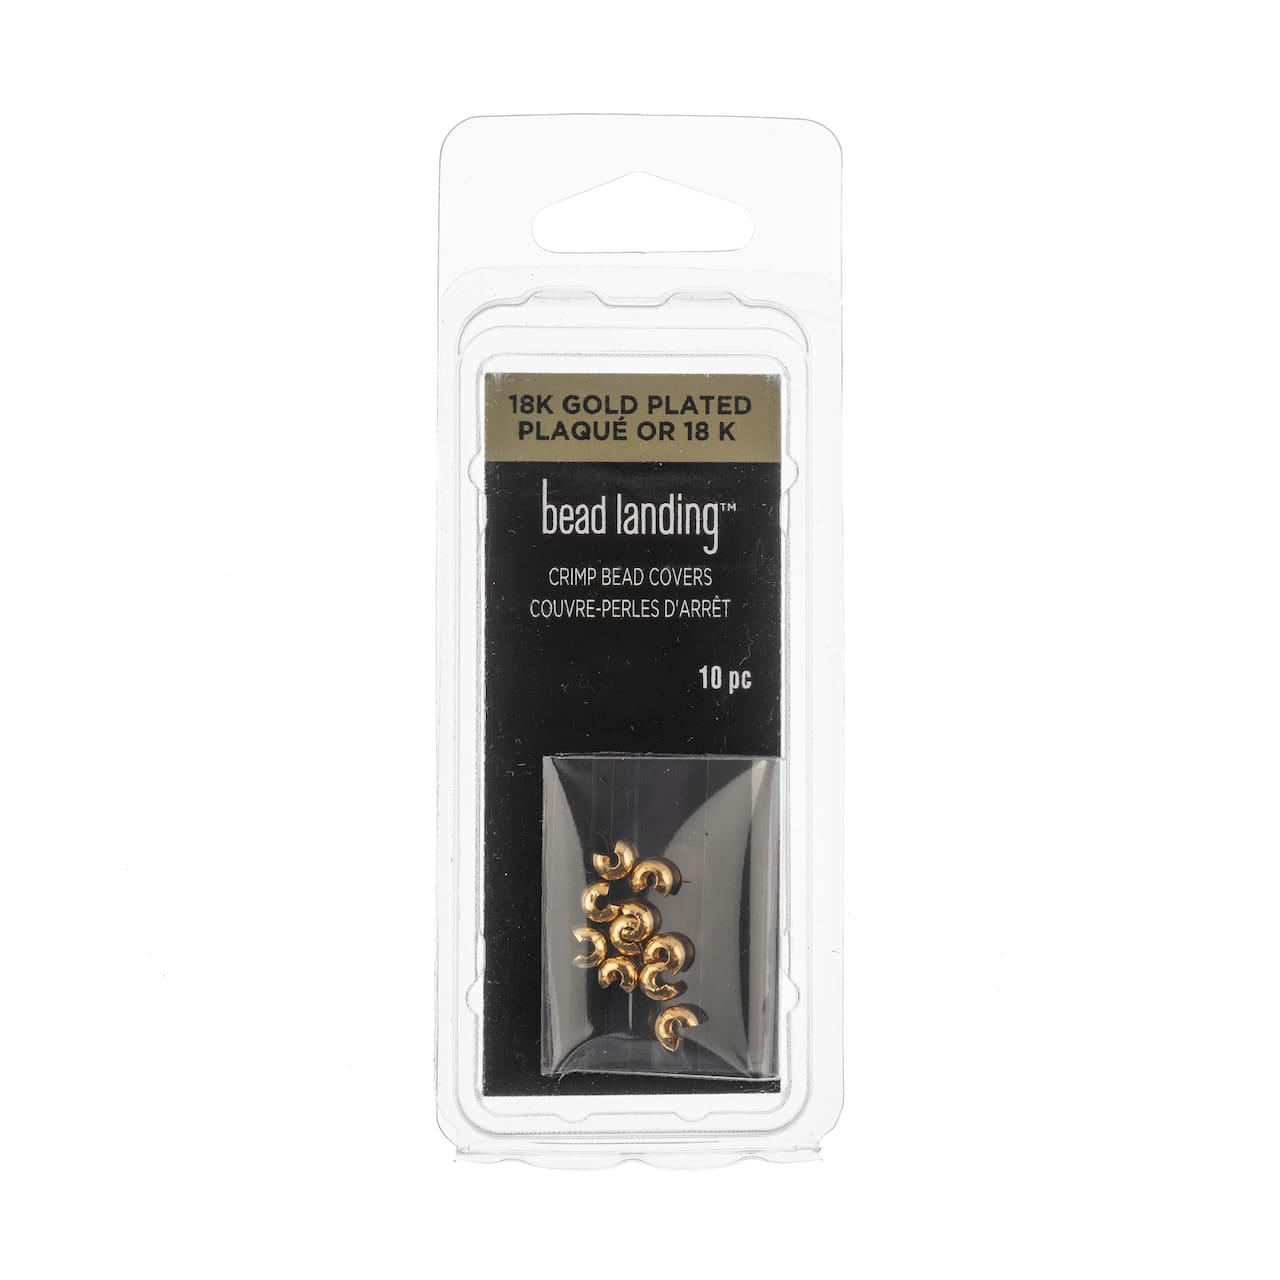 Michaels 3mm Metal Crimp Bead Covers, 10ct. by Bead Landing, Gold